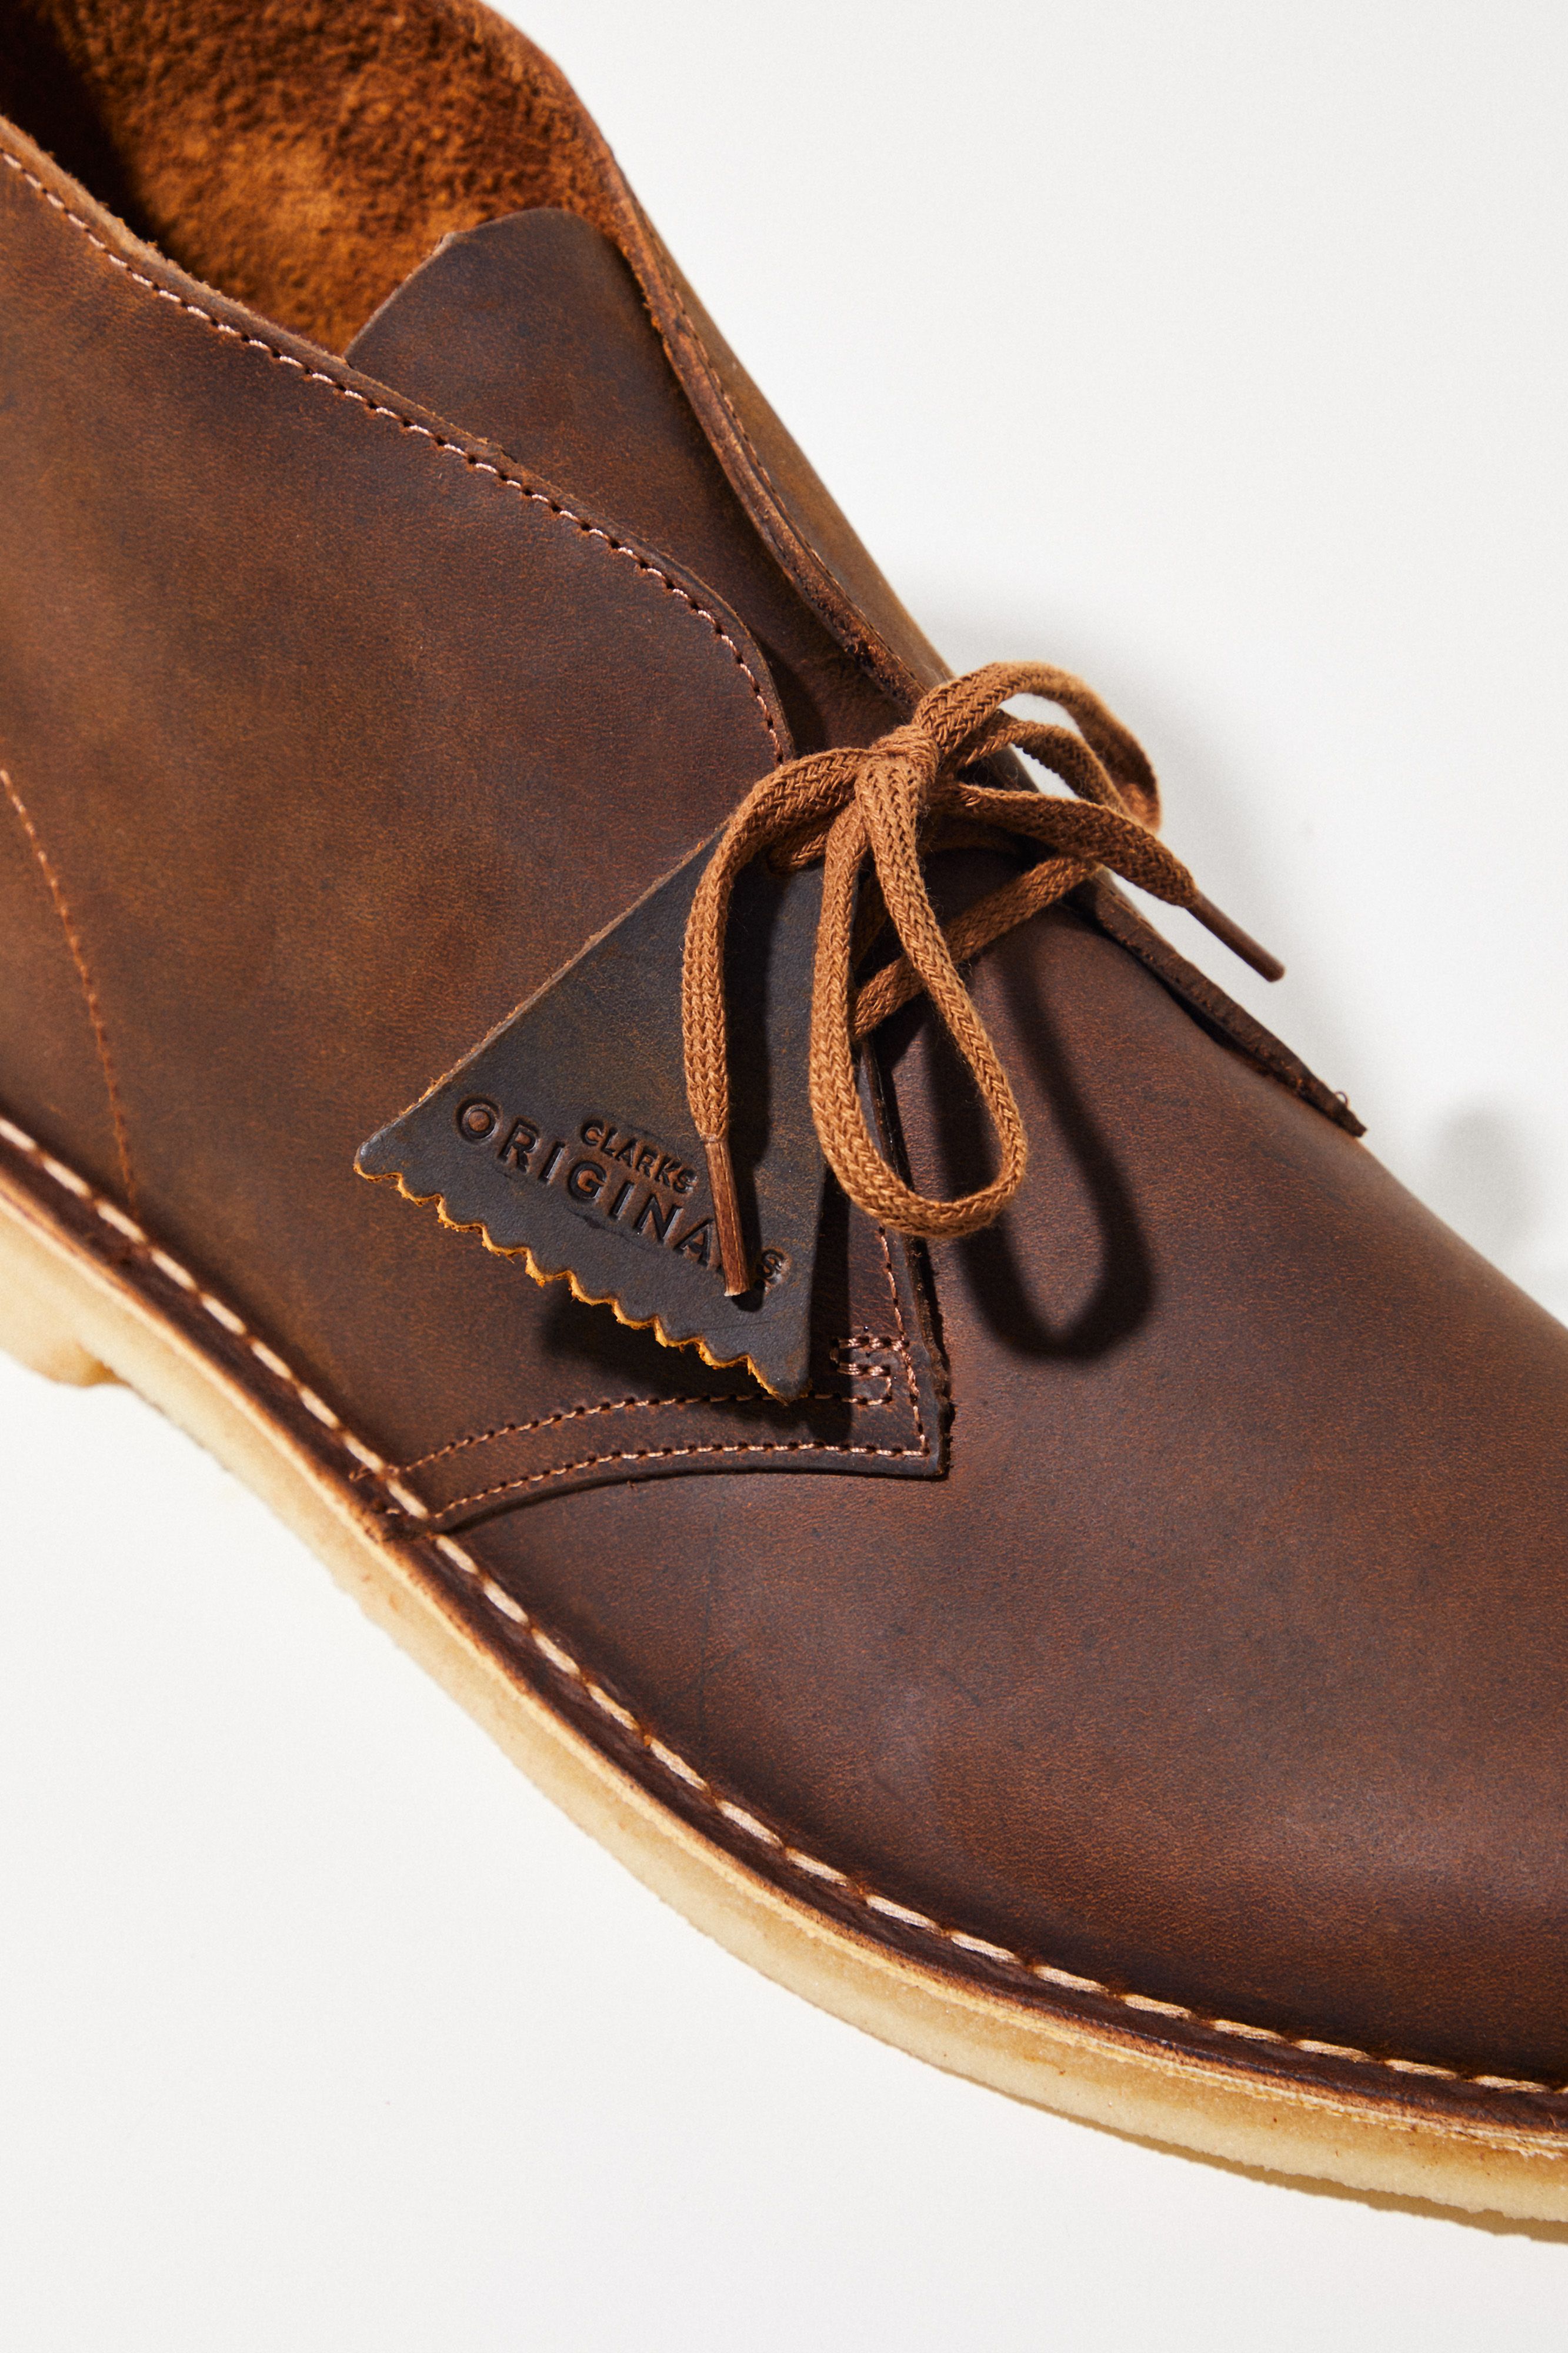 clarks brand review